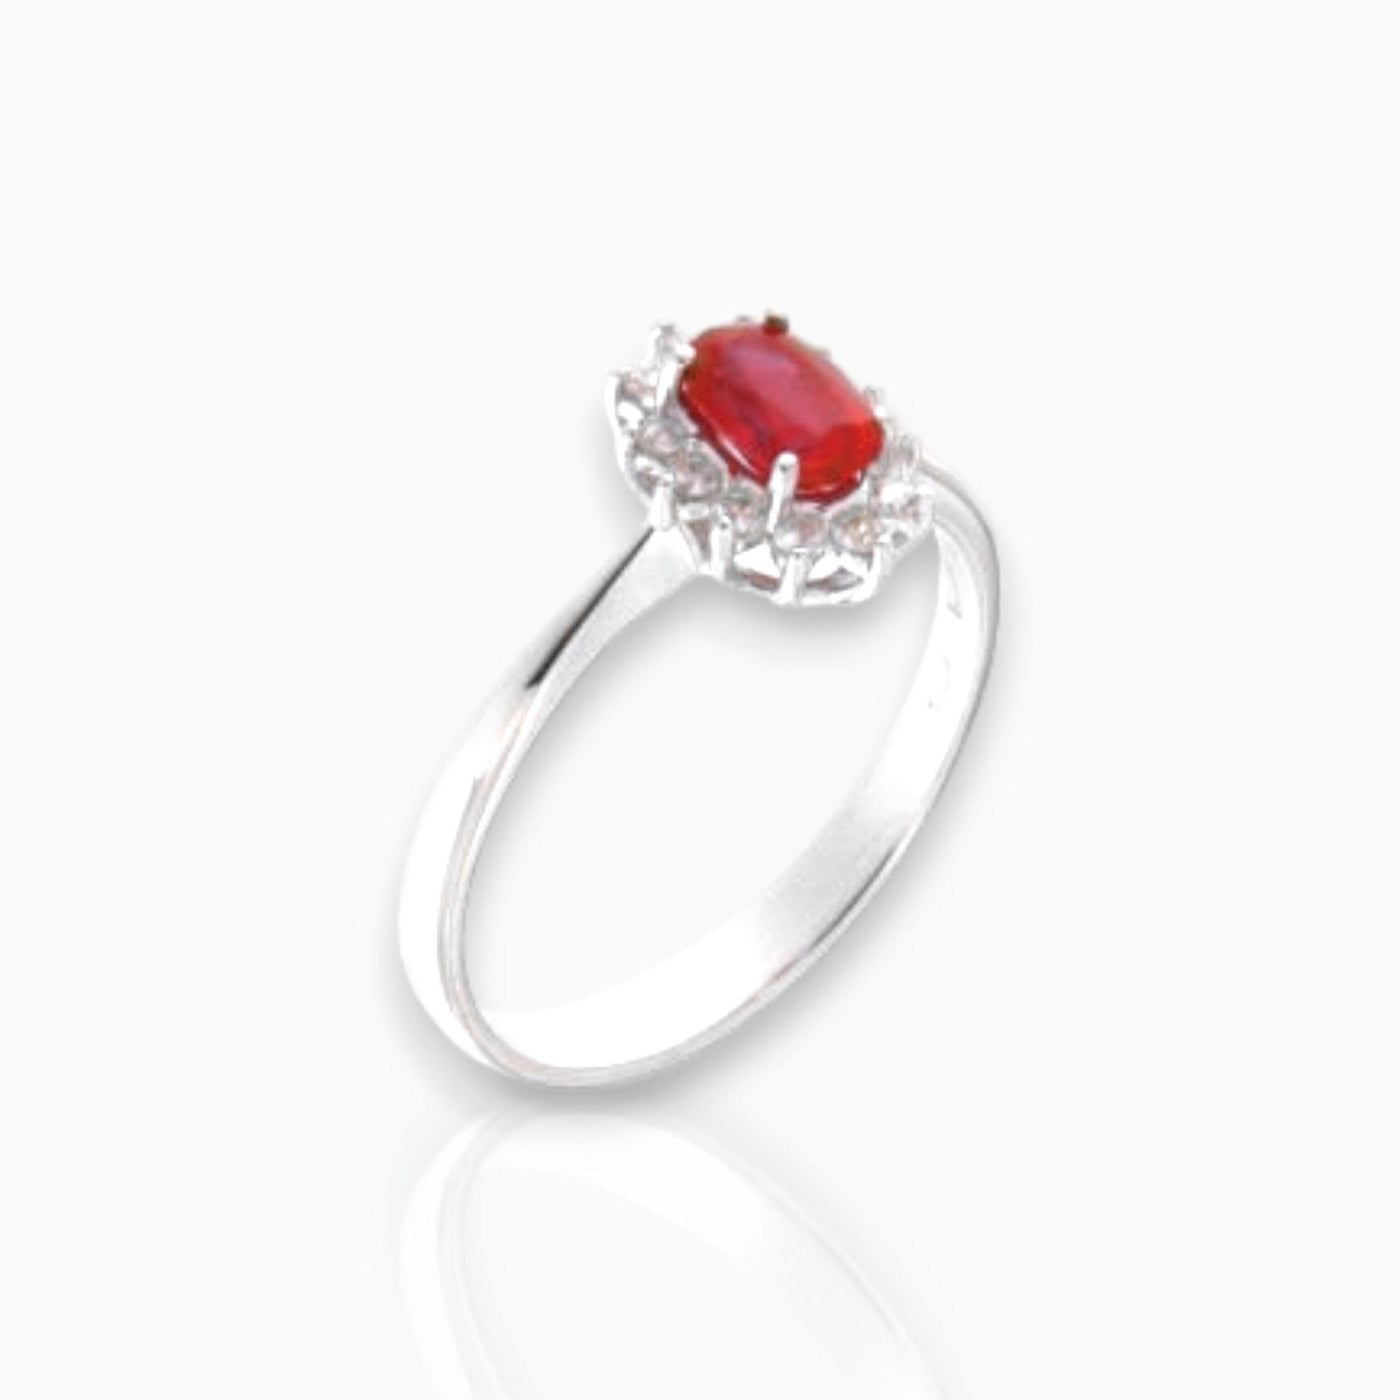 Oval Ruby Ring with Diamonds (in 4 sizes: 0.19ct - 1.25ct) - Moregola Fine Jewelry